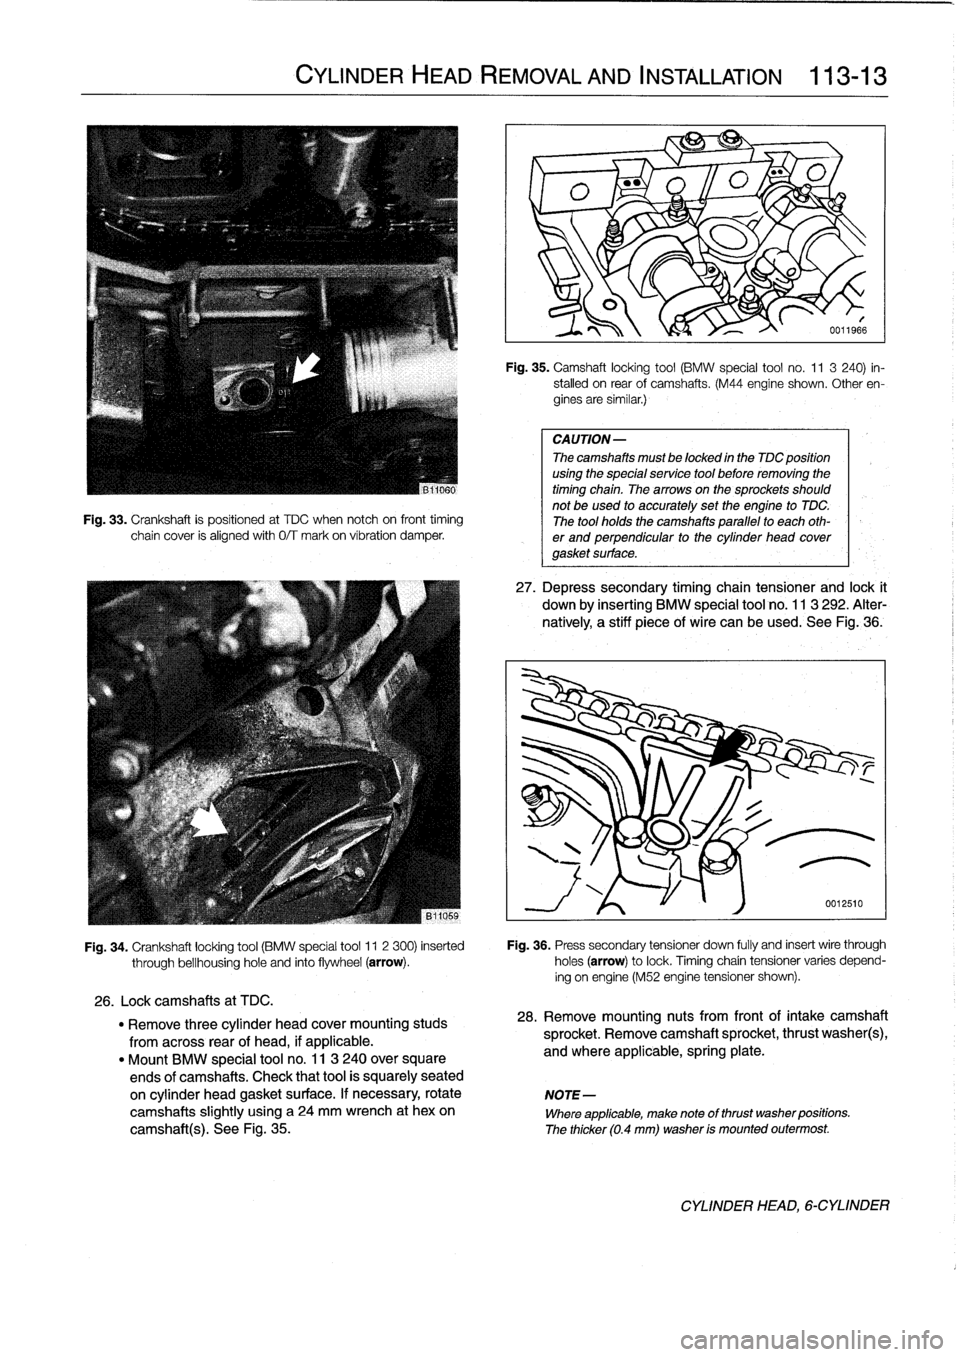 BMW M3 1996 E36 Manual PDF 
Fig
.
33
.
Crankshaft
is
positioned
at
TDC
when
notch
oh
front
timing
chain
cover
is
alignedwith
0/T
mark
on
víbration
damper
.

CYLINDER
HEAD
REMOVAL
AND
INSTALLATION

	

113-
1
3

Fig
.
35
.
Camsh